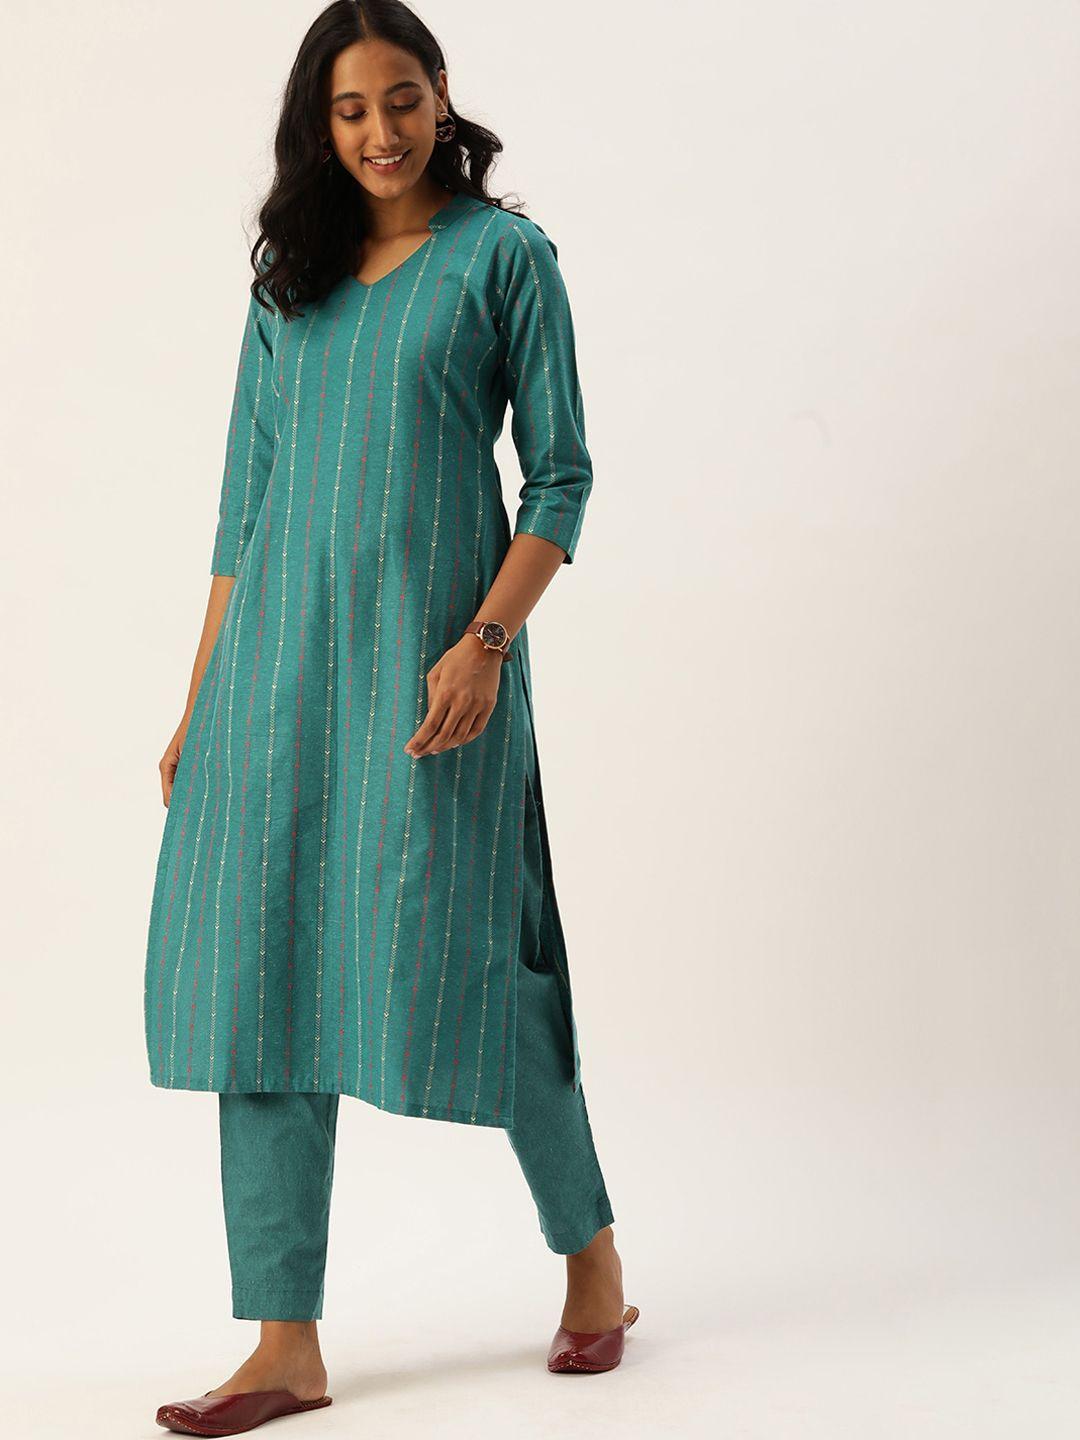 shaily-turquoise-blue-ethnic-woven-design-straight-kurta-with-trousers